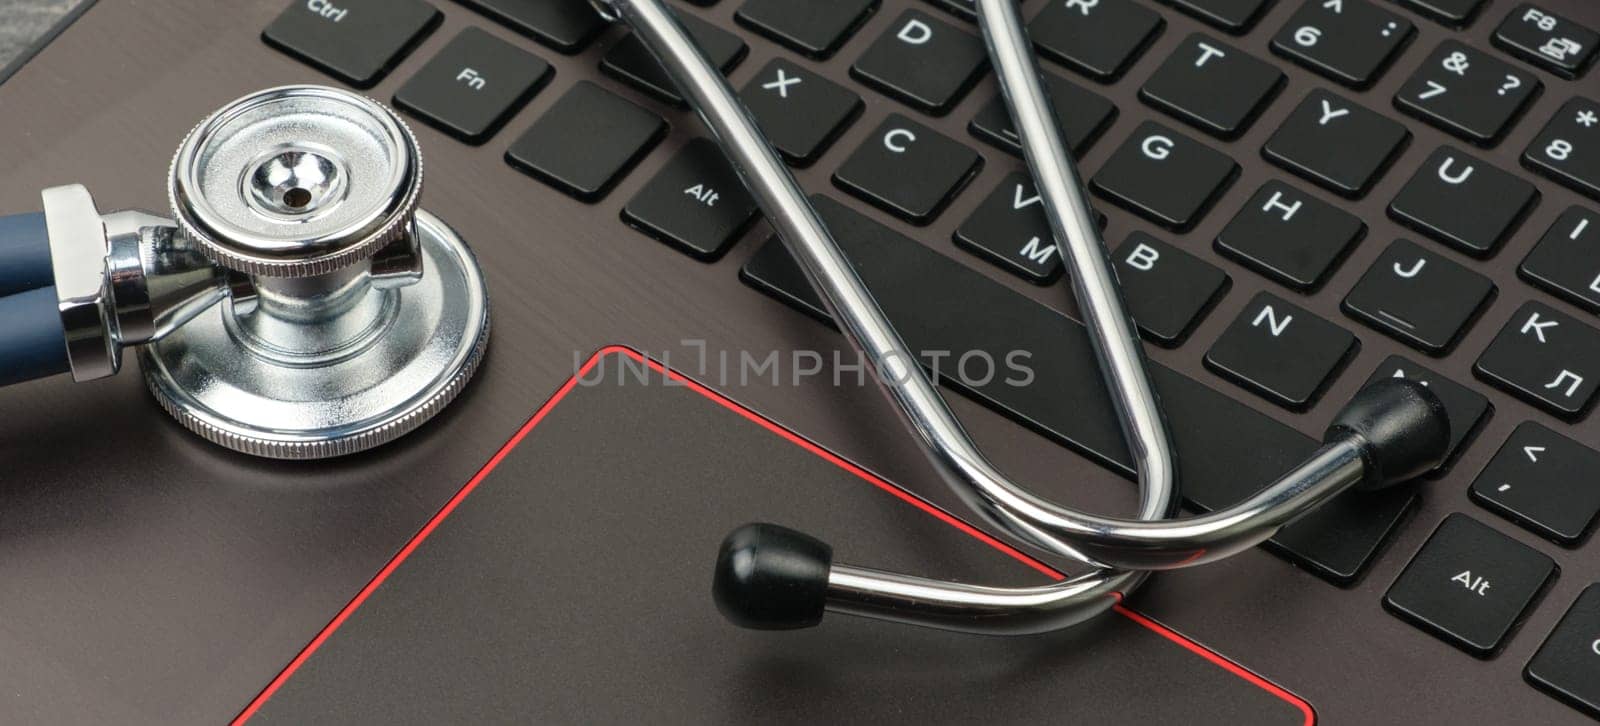 Silver stethoscope on a modern laptop keyboard. by Sd28DimoN_1976